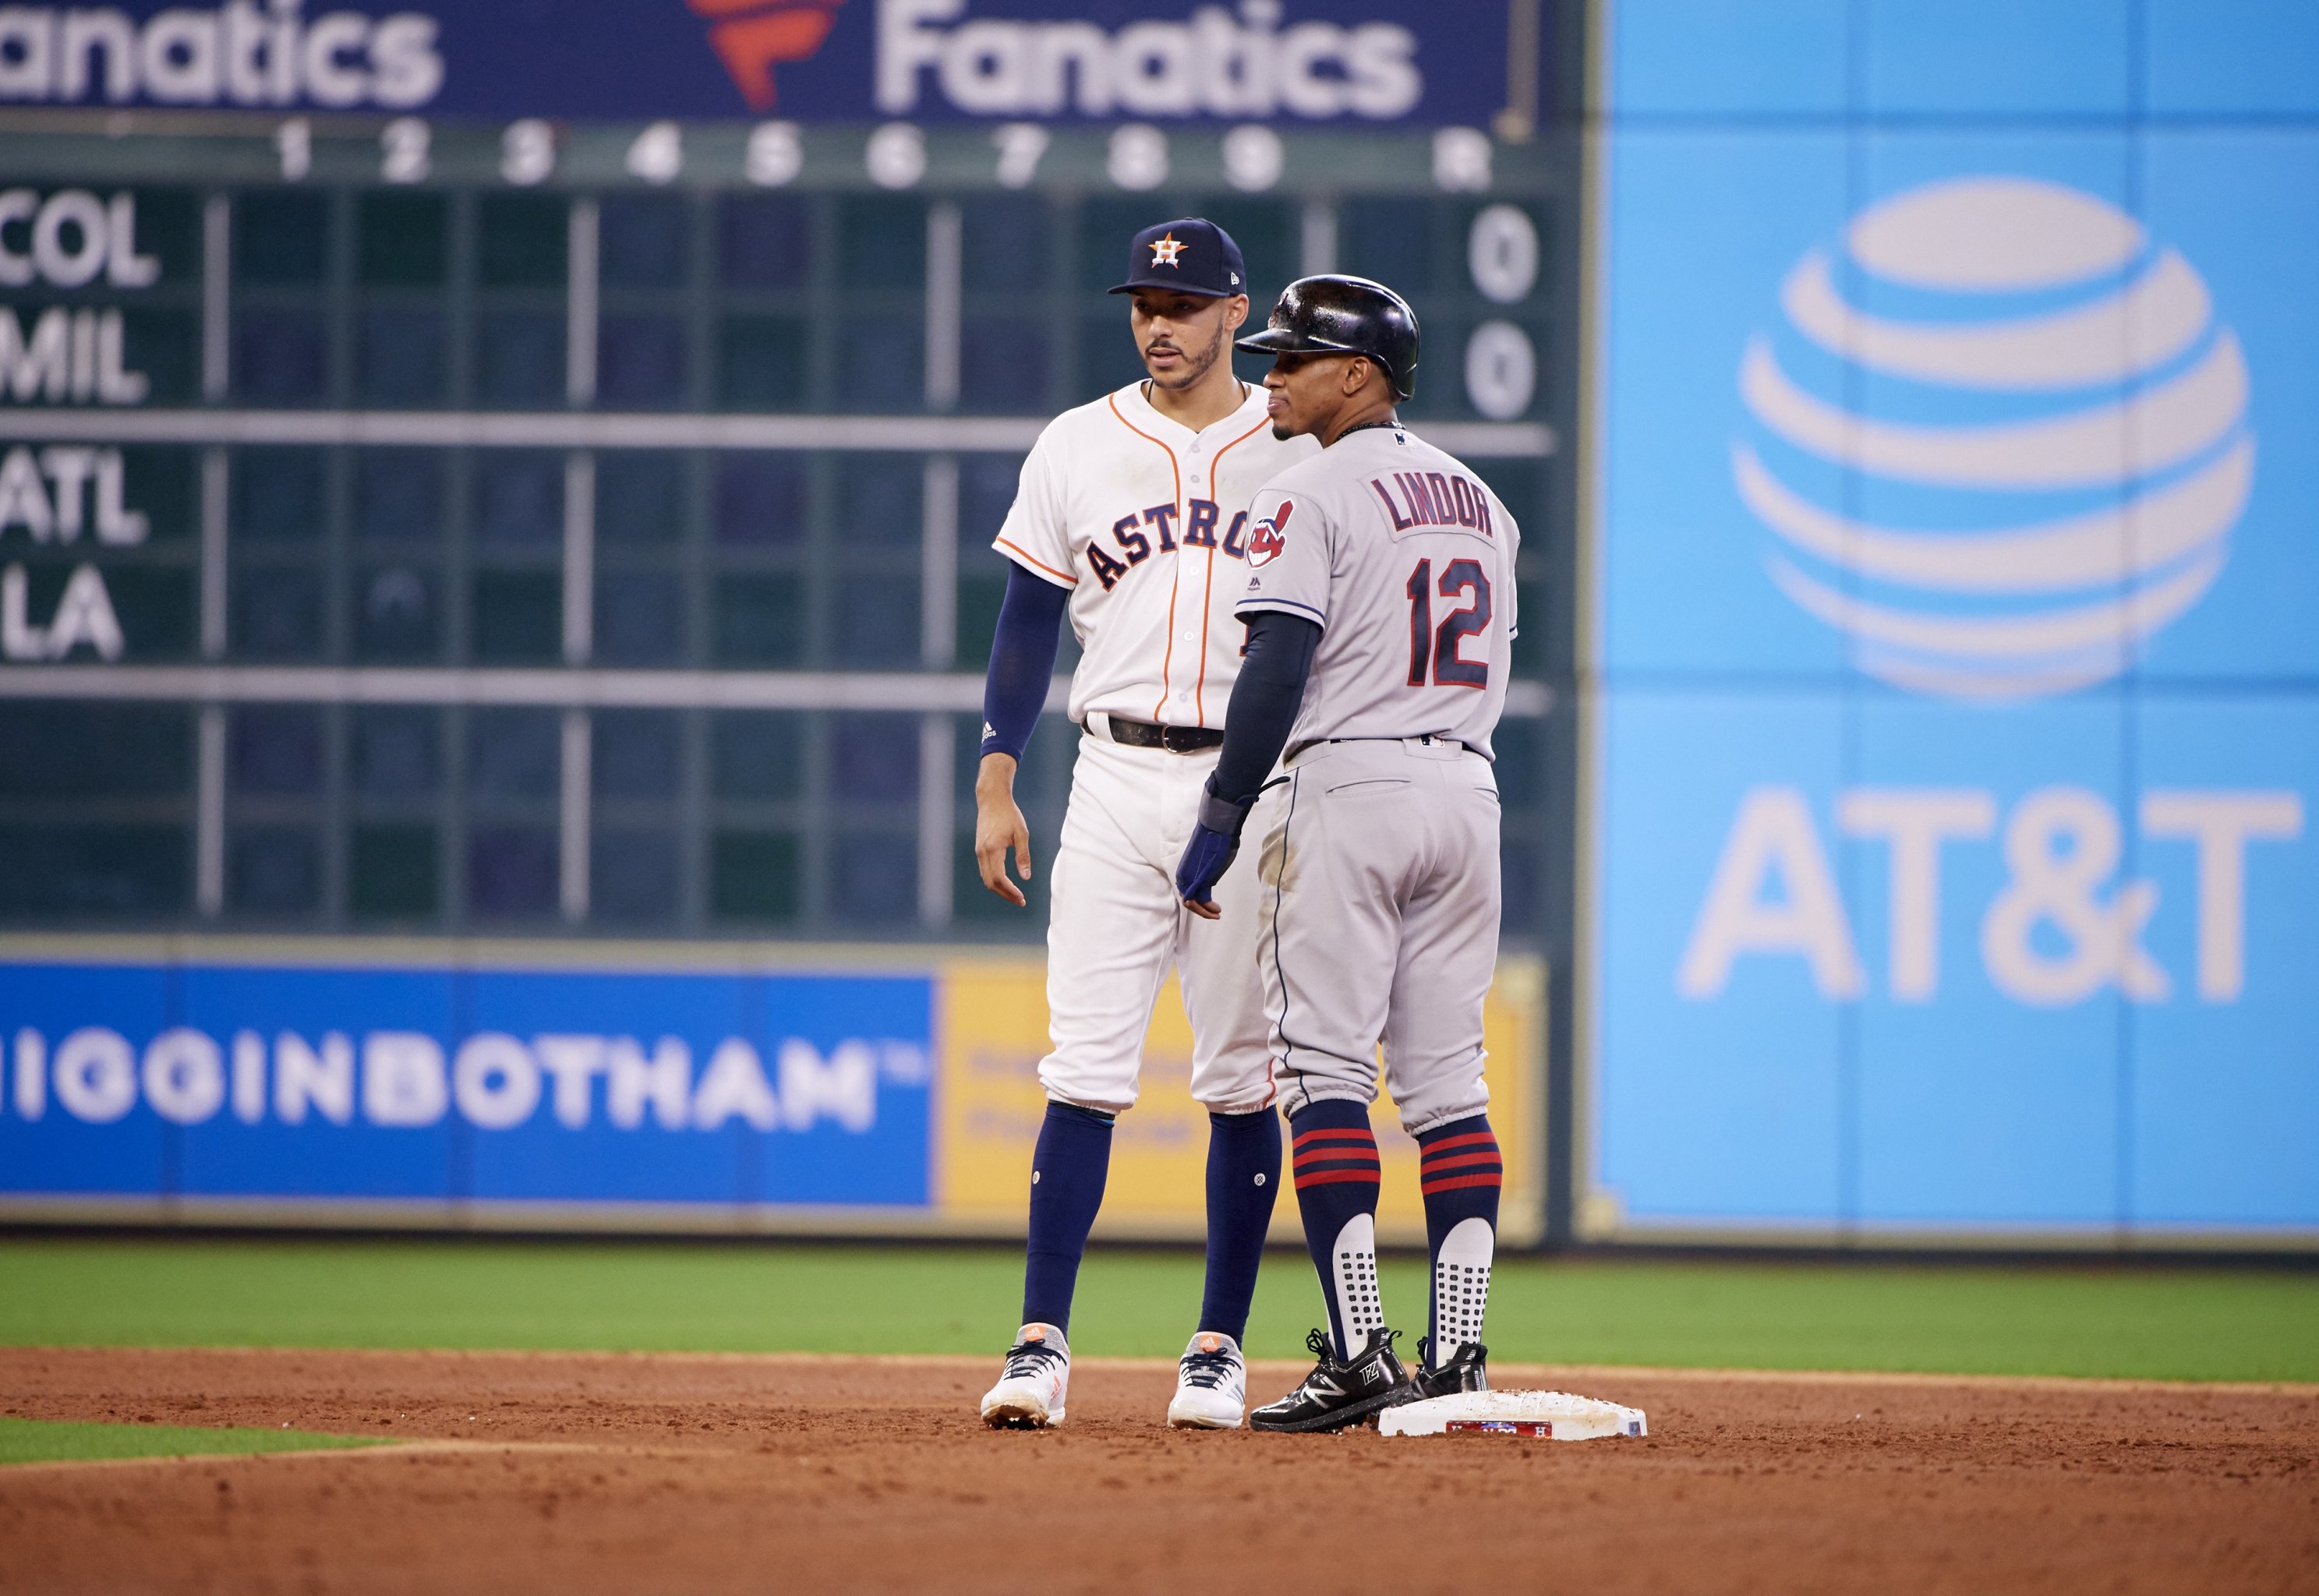 Carlos Correa free agency: Ranking all 30 teams as possible landing spots  with fringe contenders leading list 